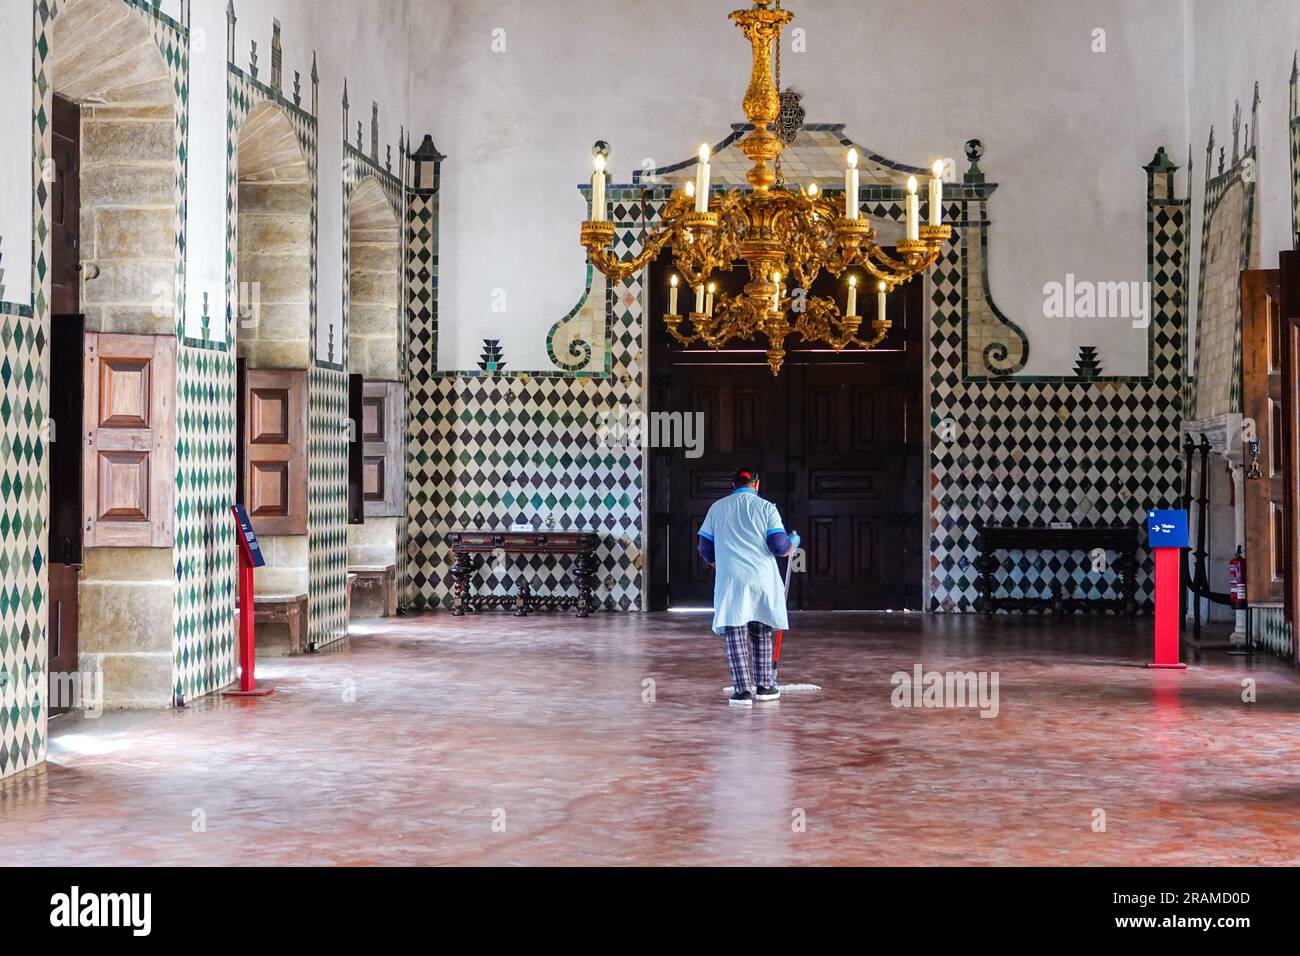 A maid dusts the floor at the Swan Hall or Great Hall with decorated ceiling panels painted with crowned swans at the Sintra National Palace in Sintra, Portugal. The Romanticist architectural and fairytale palaces draws tourists from around the world. Stock Photo